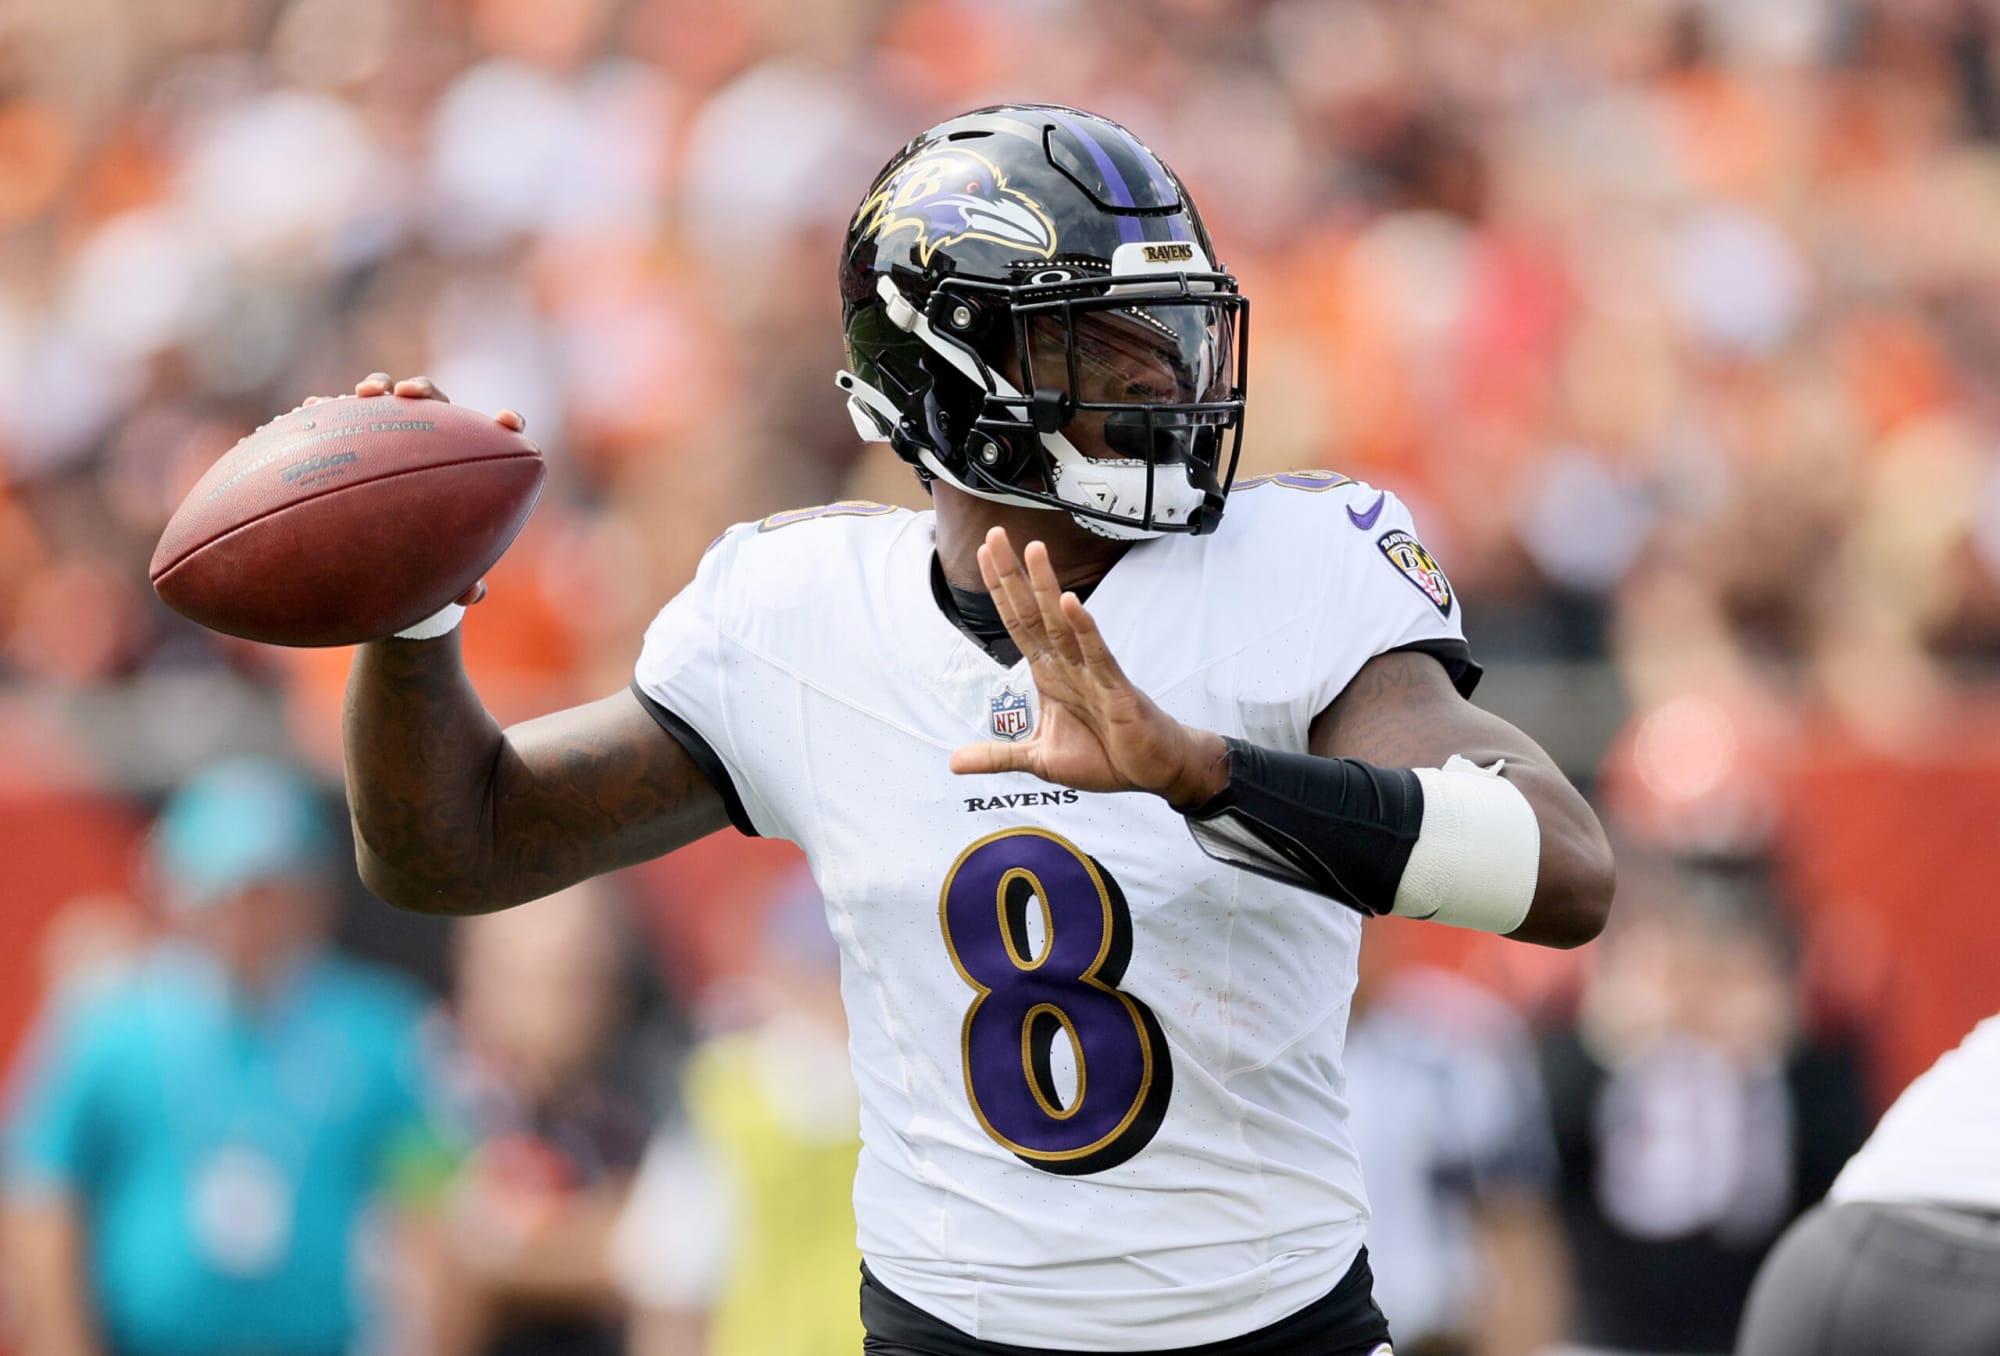 The Baltimore Ravens are serious contenders for the Super Bowl